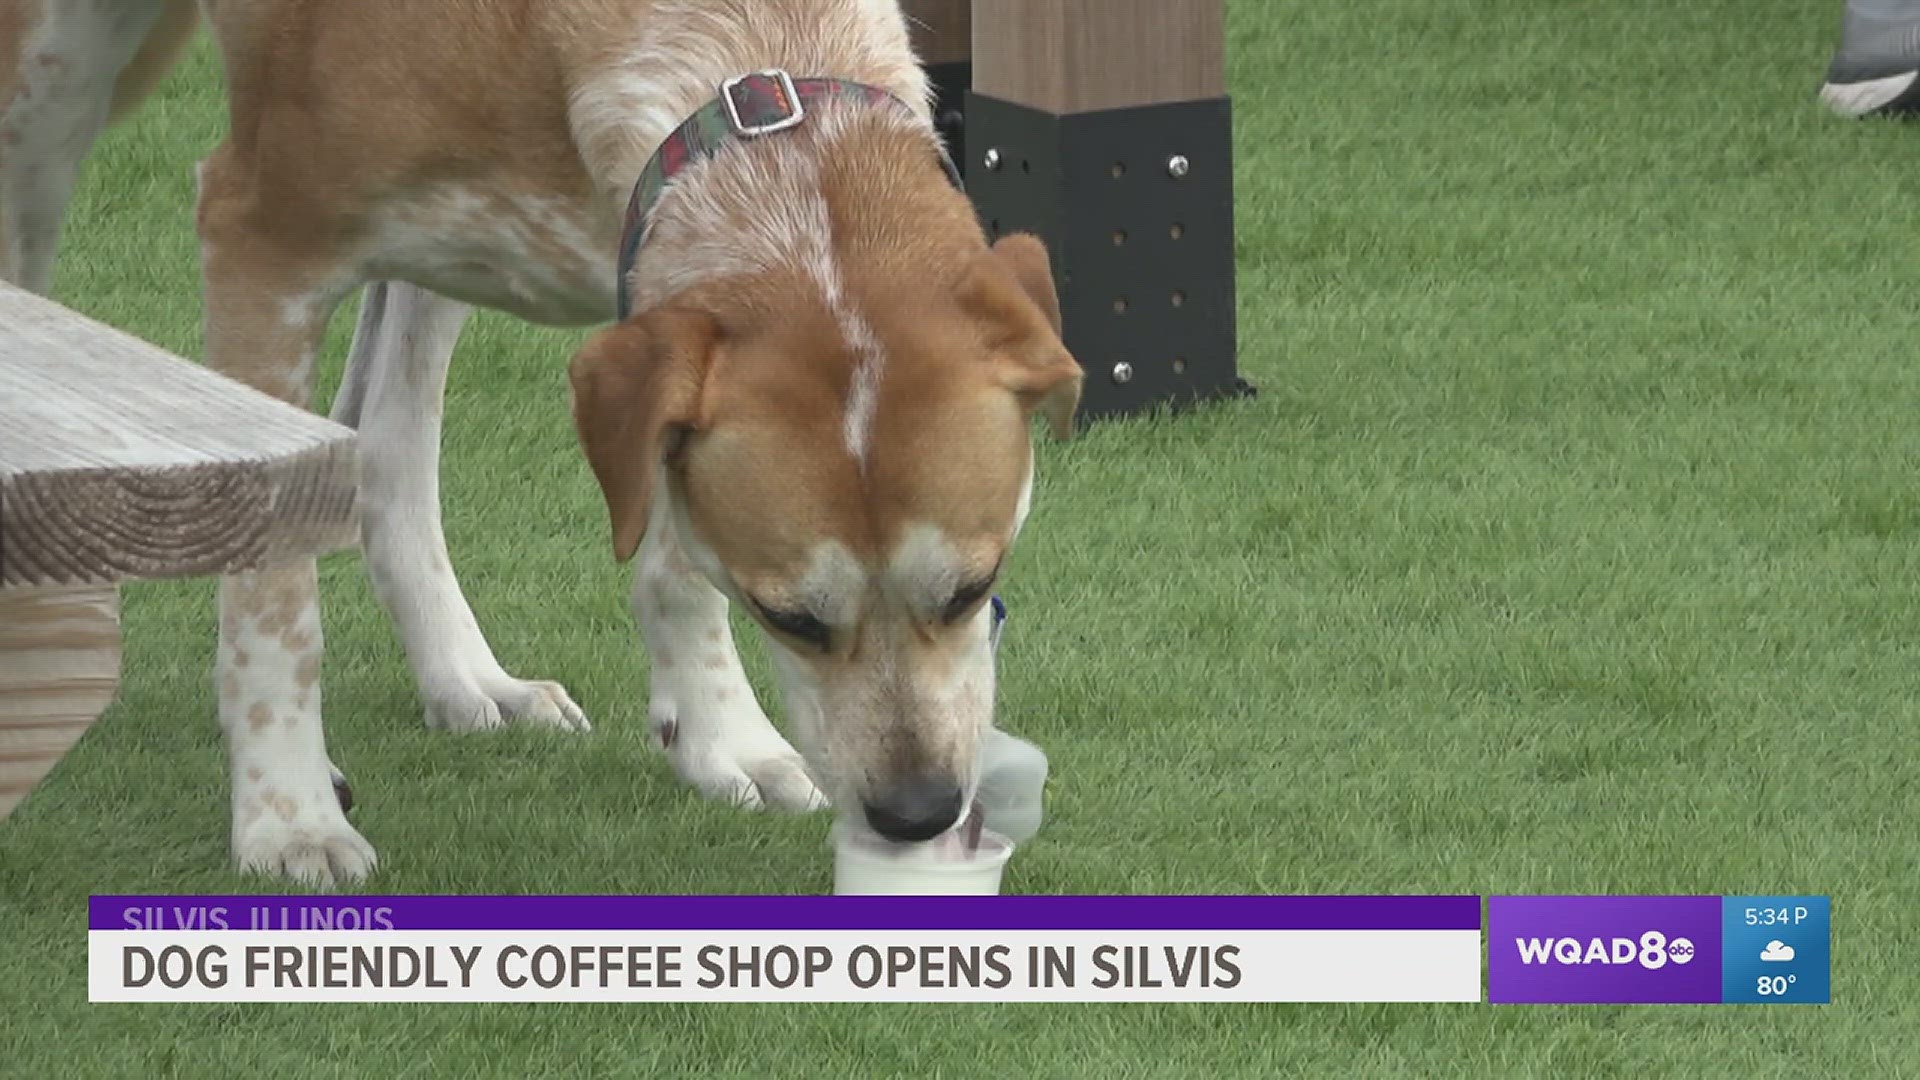 Barkin Beans Coffee Co. offers human drinks alongside dog cookies and whipped cream Pup Cups. A dog-friendly latte menu is in the works.